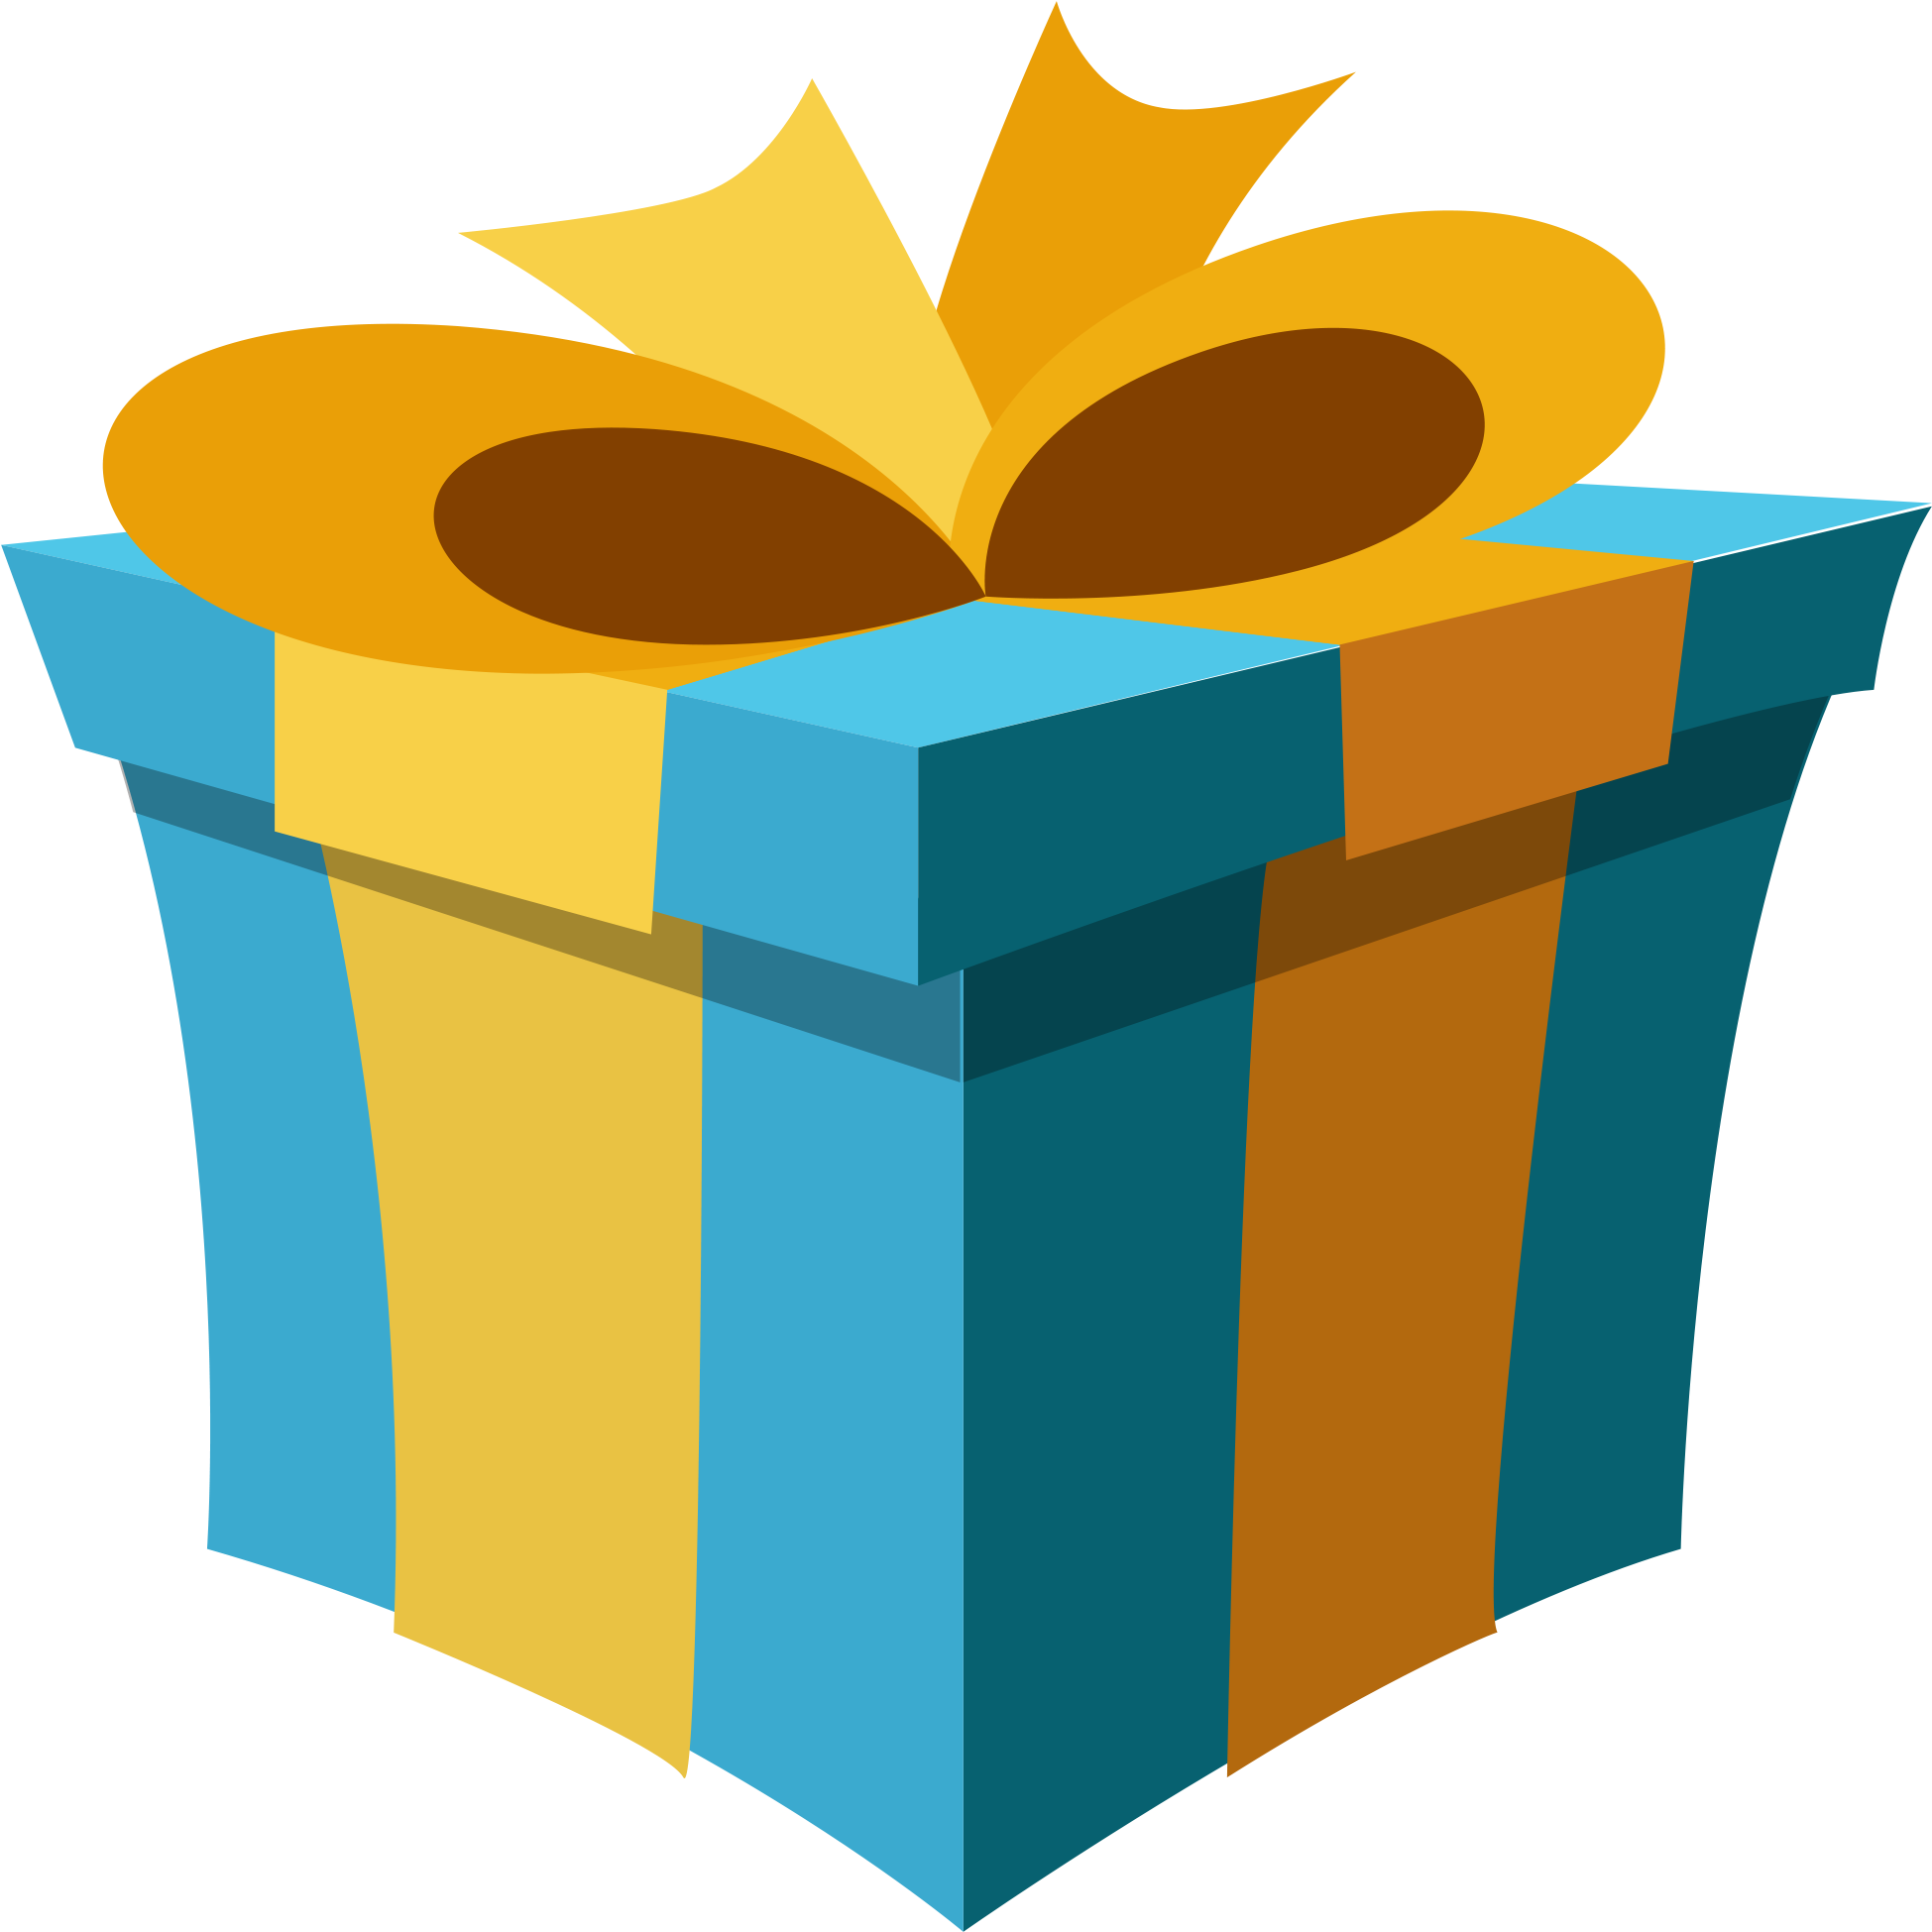 share clipart about Wrapped Present Emoji - Gift Emoji, Find more high qual...